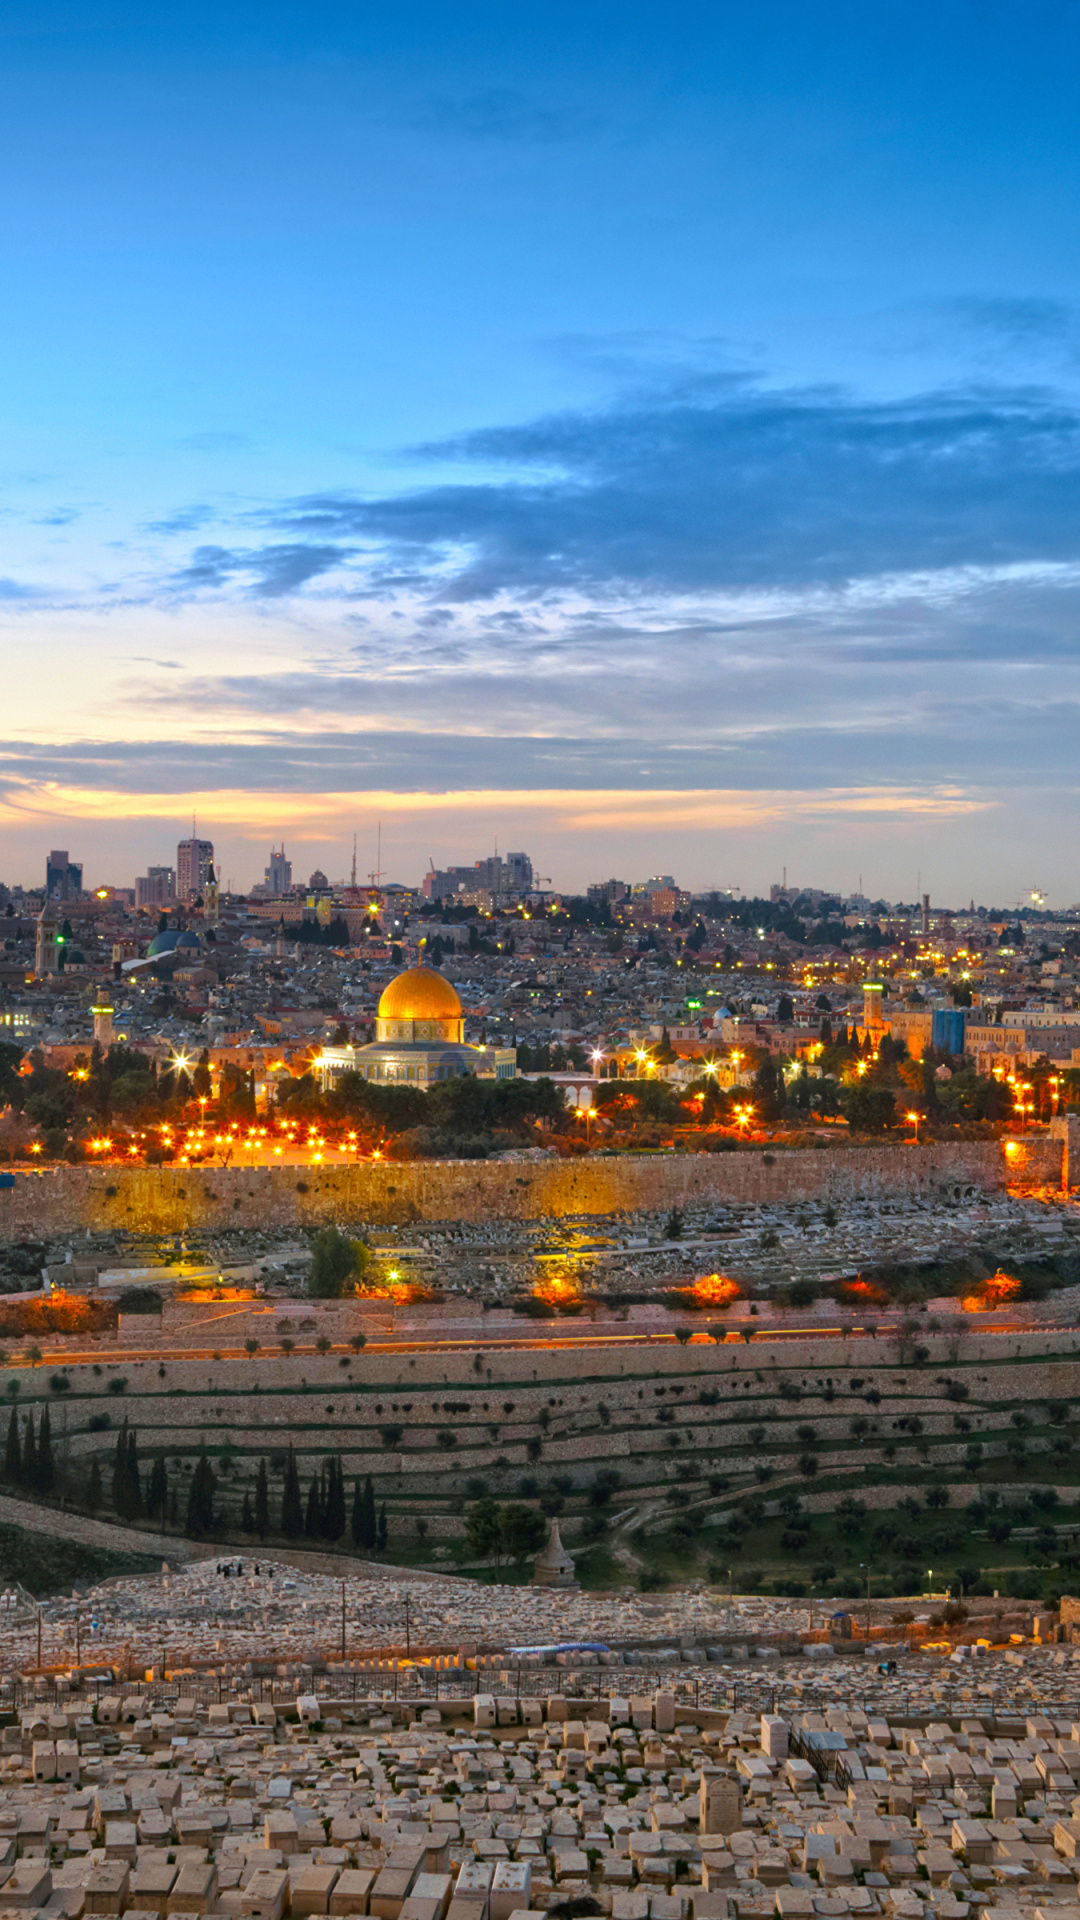 Jerusalem: Home to Jerusalem's most important and contested religious sites - the Western Wall and Temple Mount for Jews, the Dome of the Rock and al-Aqsa Mosque for Muslims, and the Church of the Holy Sepulchre for Christians. 1080x1920 Full HD Background.